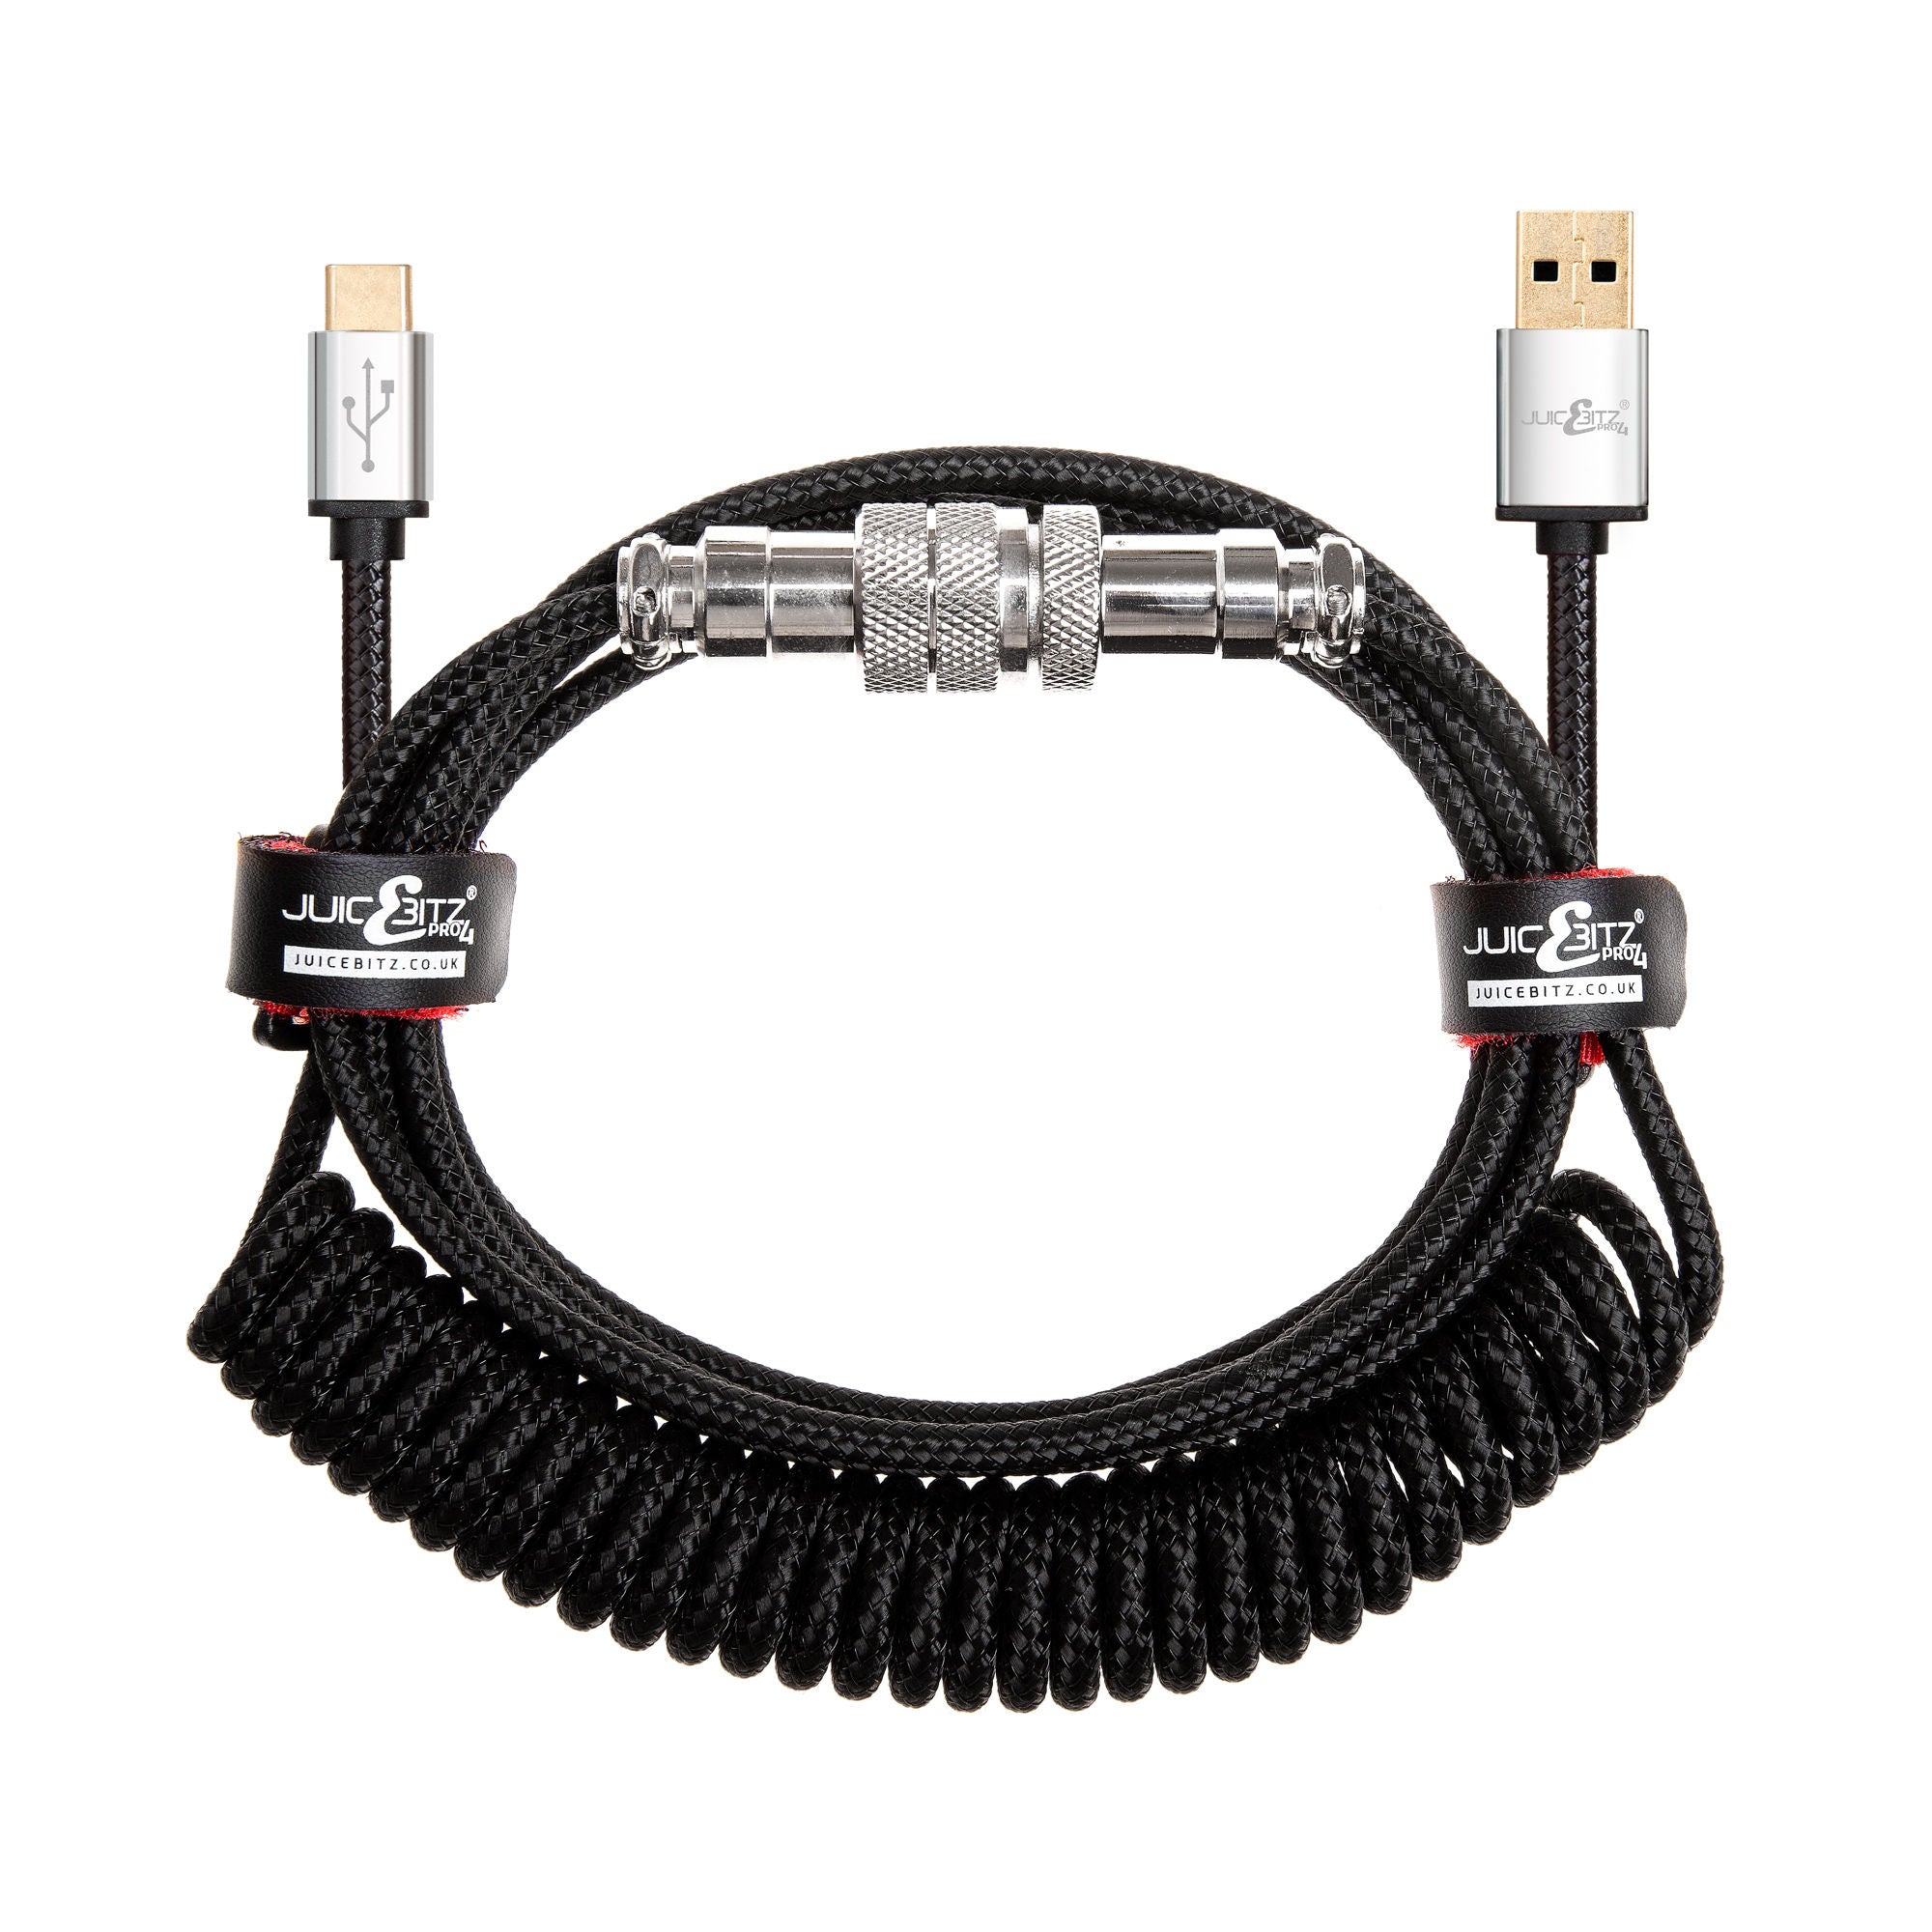 PRO Series Retractable Coiled USB 2.0 to GX16 + GX16 to USB-C Cable for Mechanical Keyboard - Black